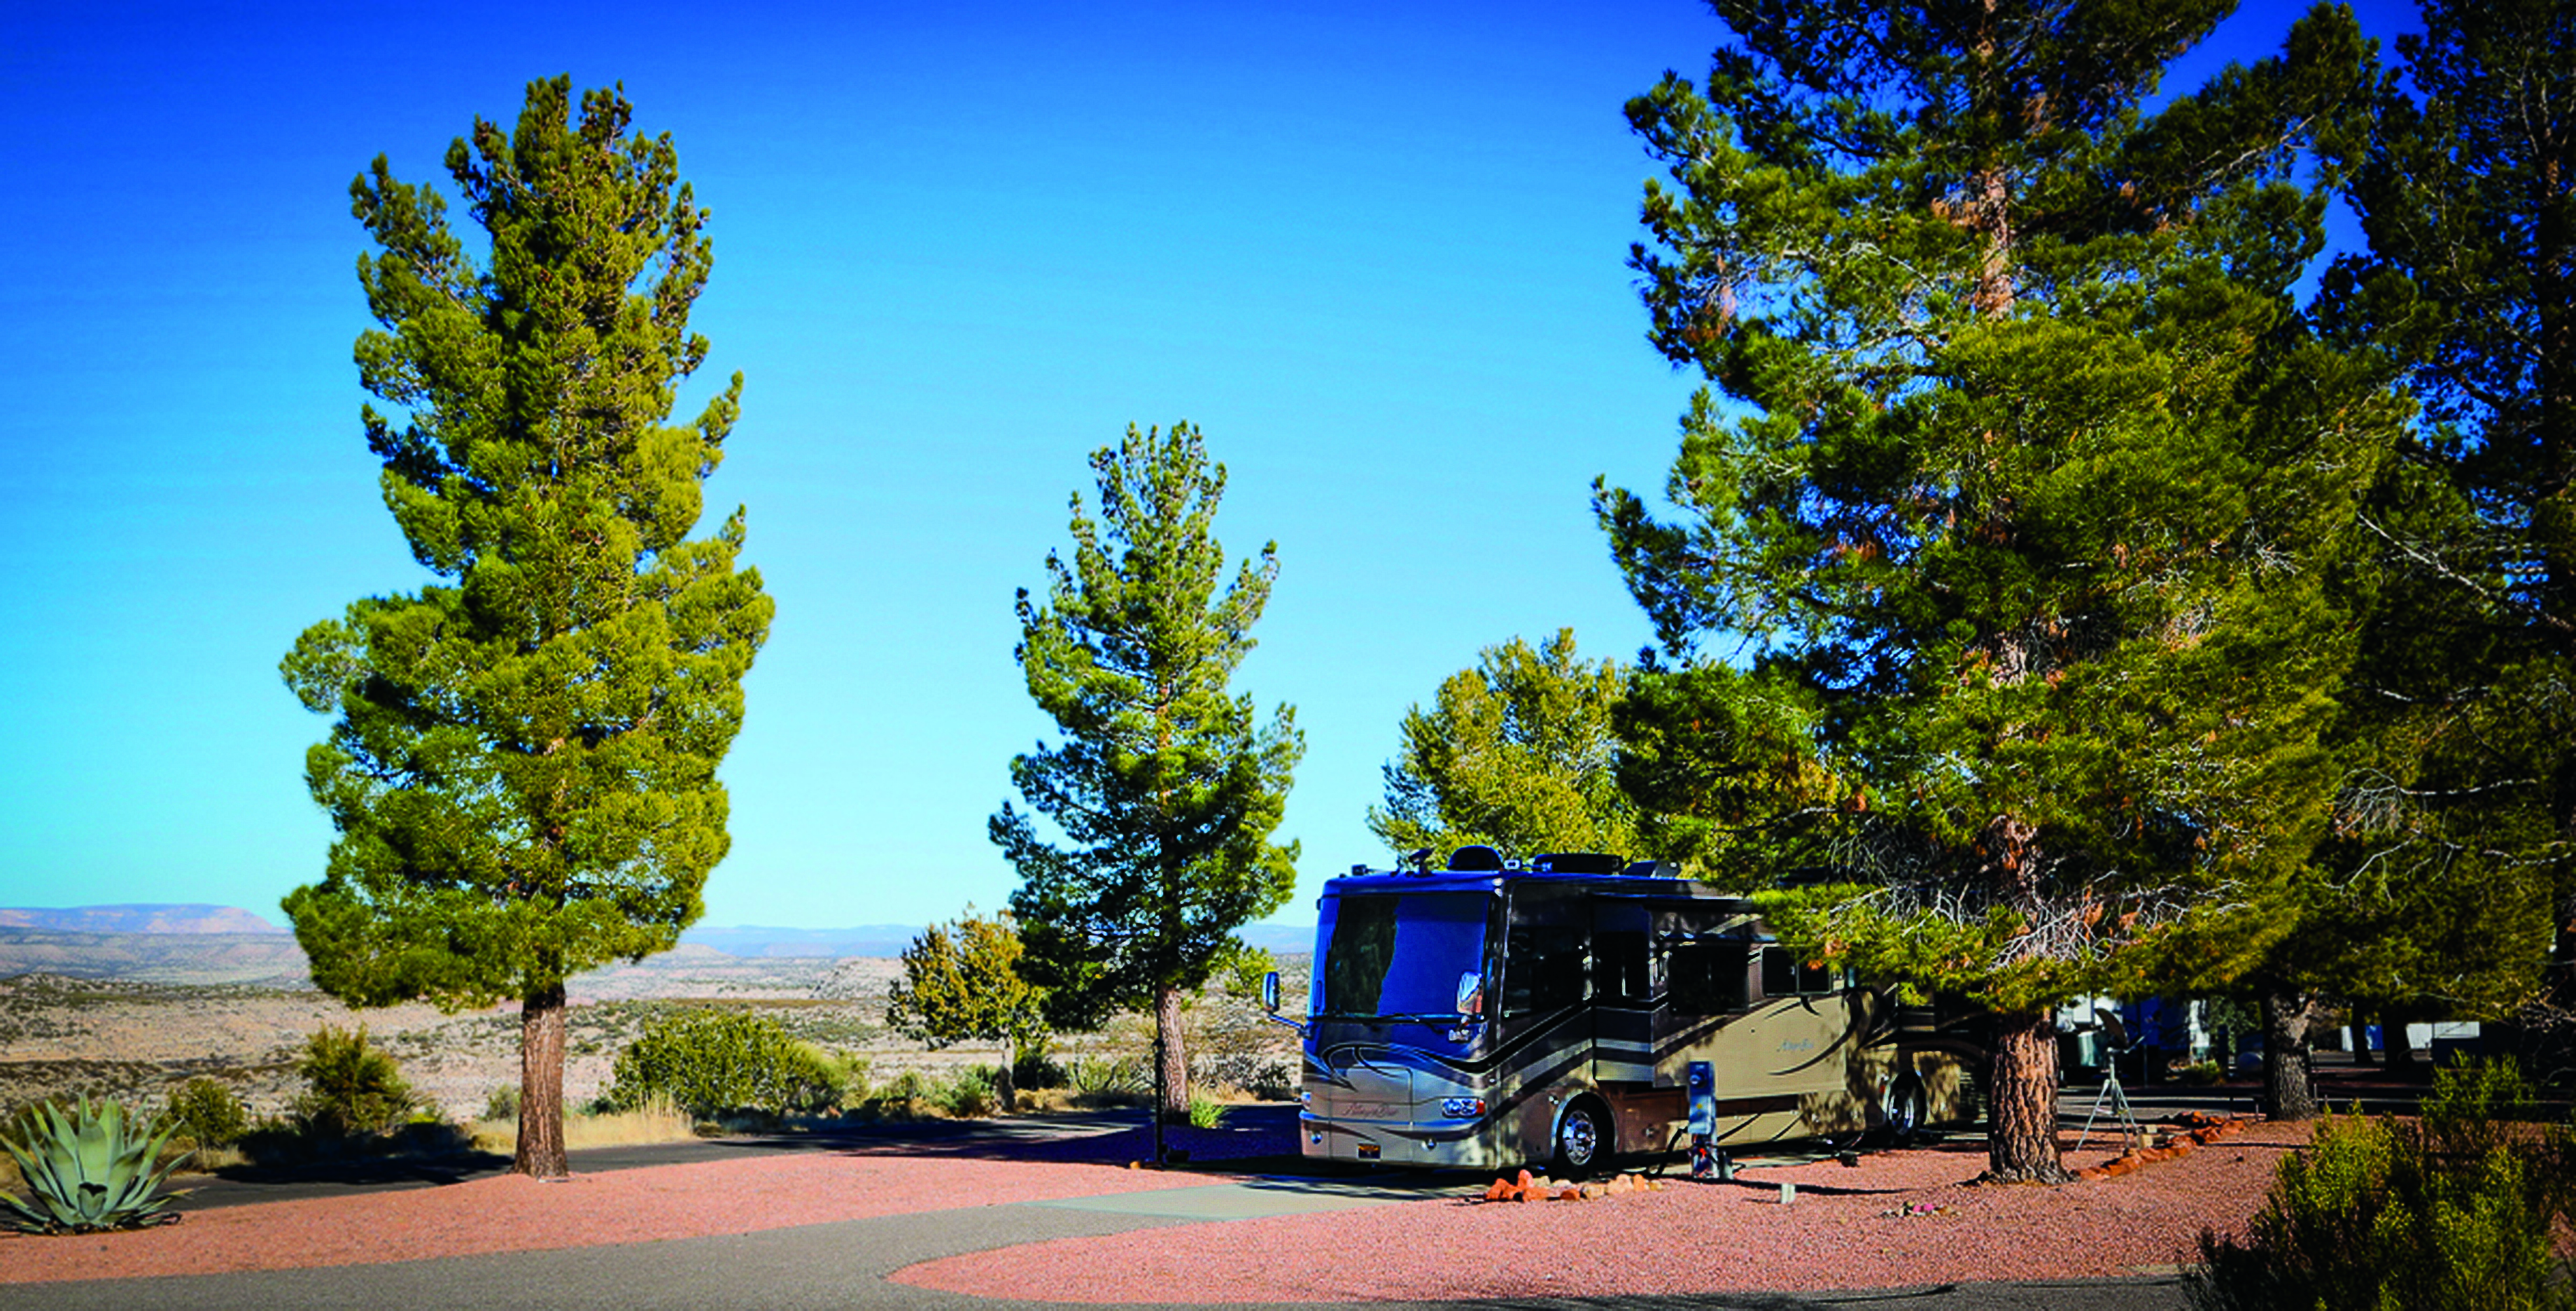 Motorhome in in a campground with beautiful vista.